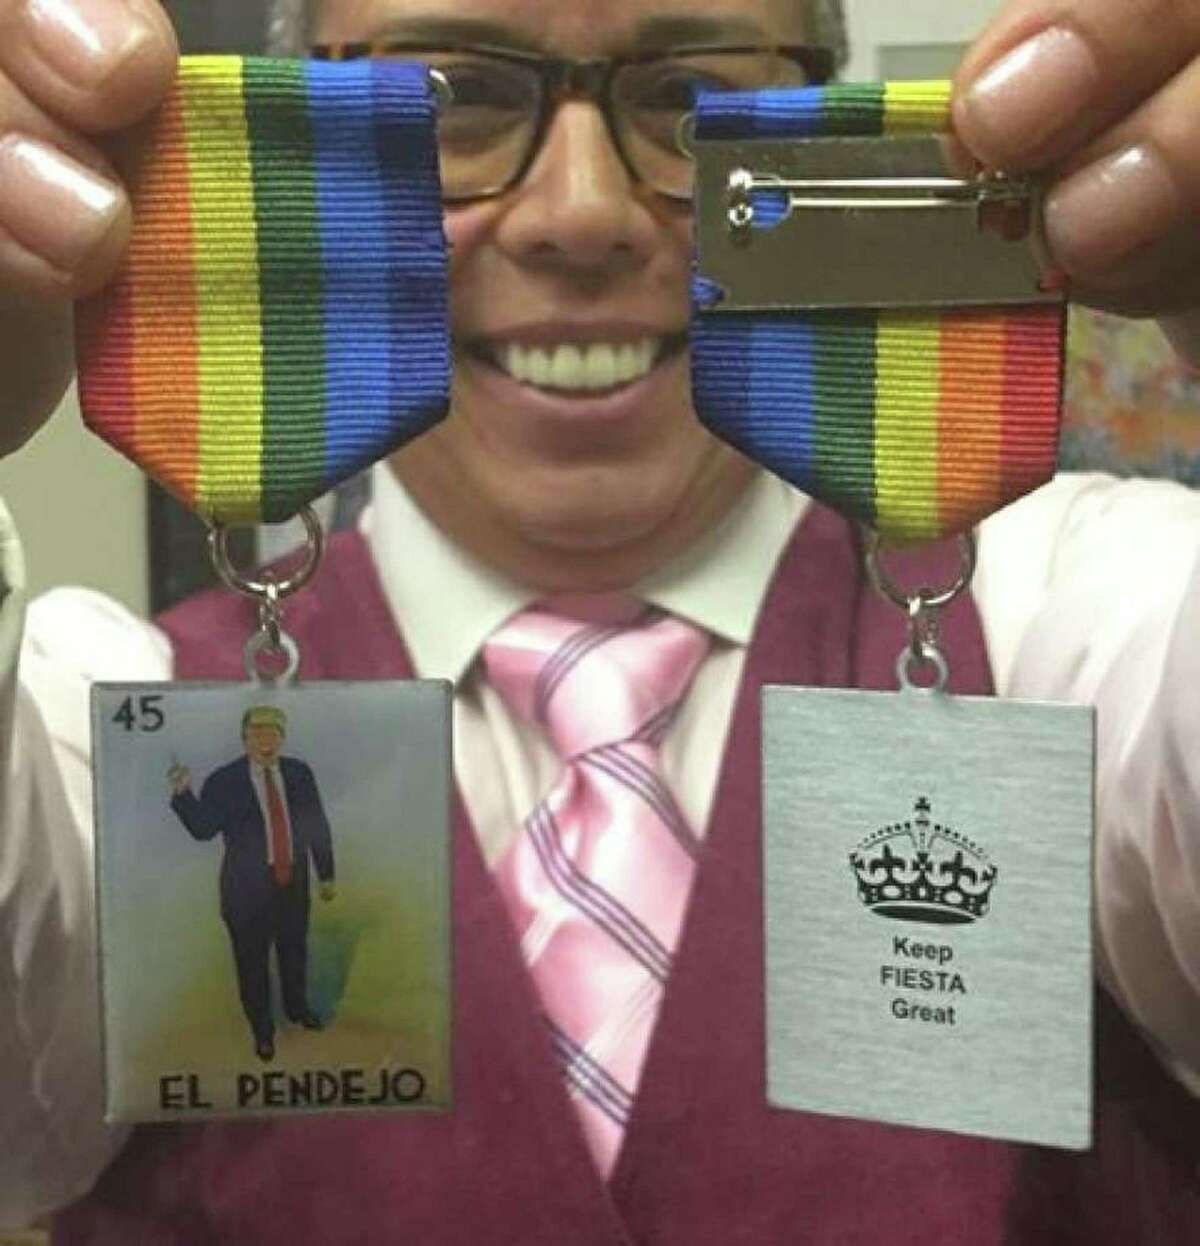 Lotería fun is definitely in the cards during Fiesta. Take San Antonio attorney Rosie Gonzalez and her lotería-inspired "El Pendejo" Fiesta medal, a spoof of President Donald Trump. Gonzalez sold out of her first 500 medals in 48 hours, and already has the next 2,500 spoken for. Part of Gonzalez’s Trump medal sales benefit the Children’s Protection Room at Bexar County Children’s Court and the PEARLS program for teen girls.